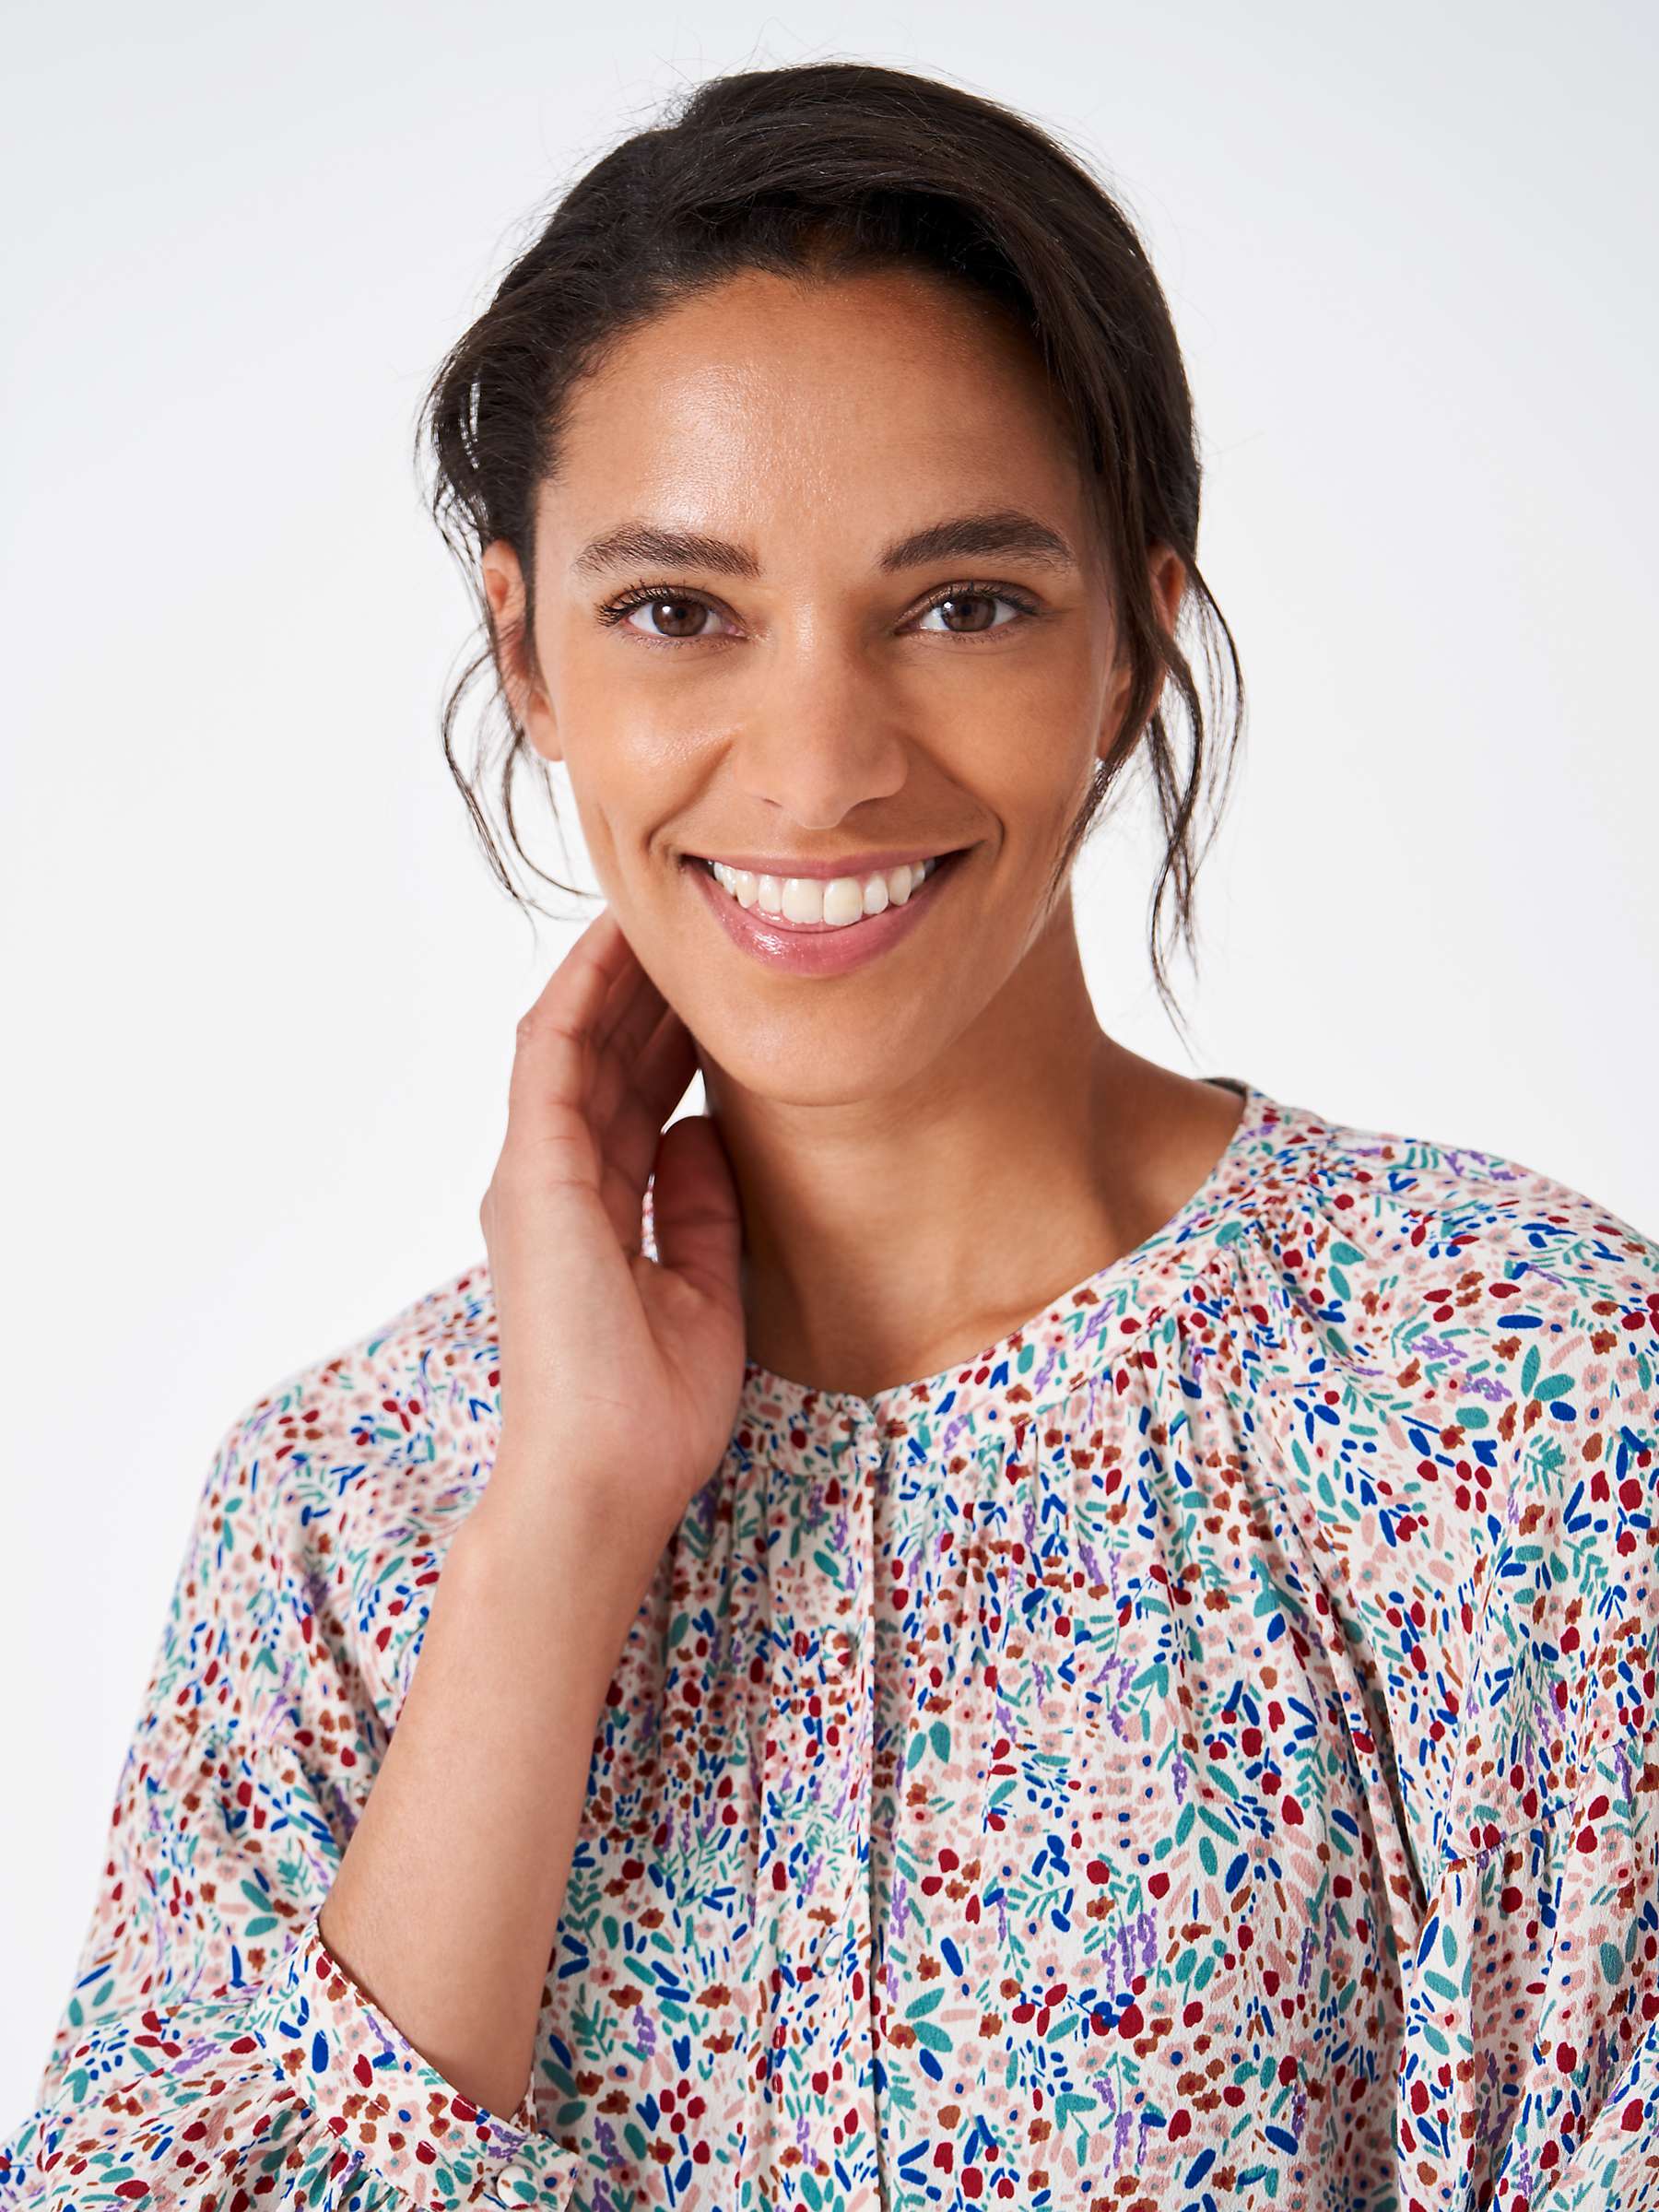 Buy Crew Clothing Annabel Floral Print Blouse, Red Wine Online at johnlewis.com